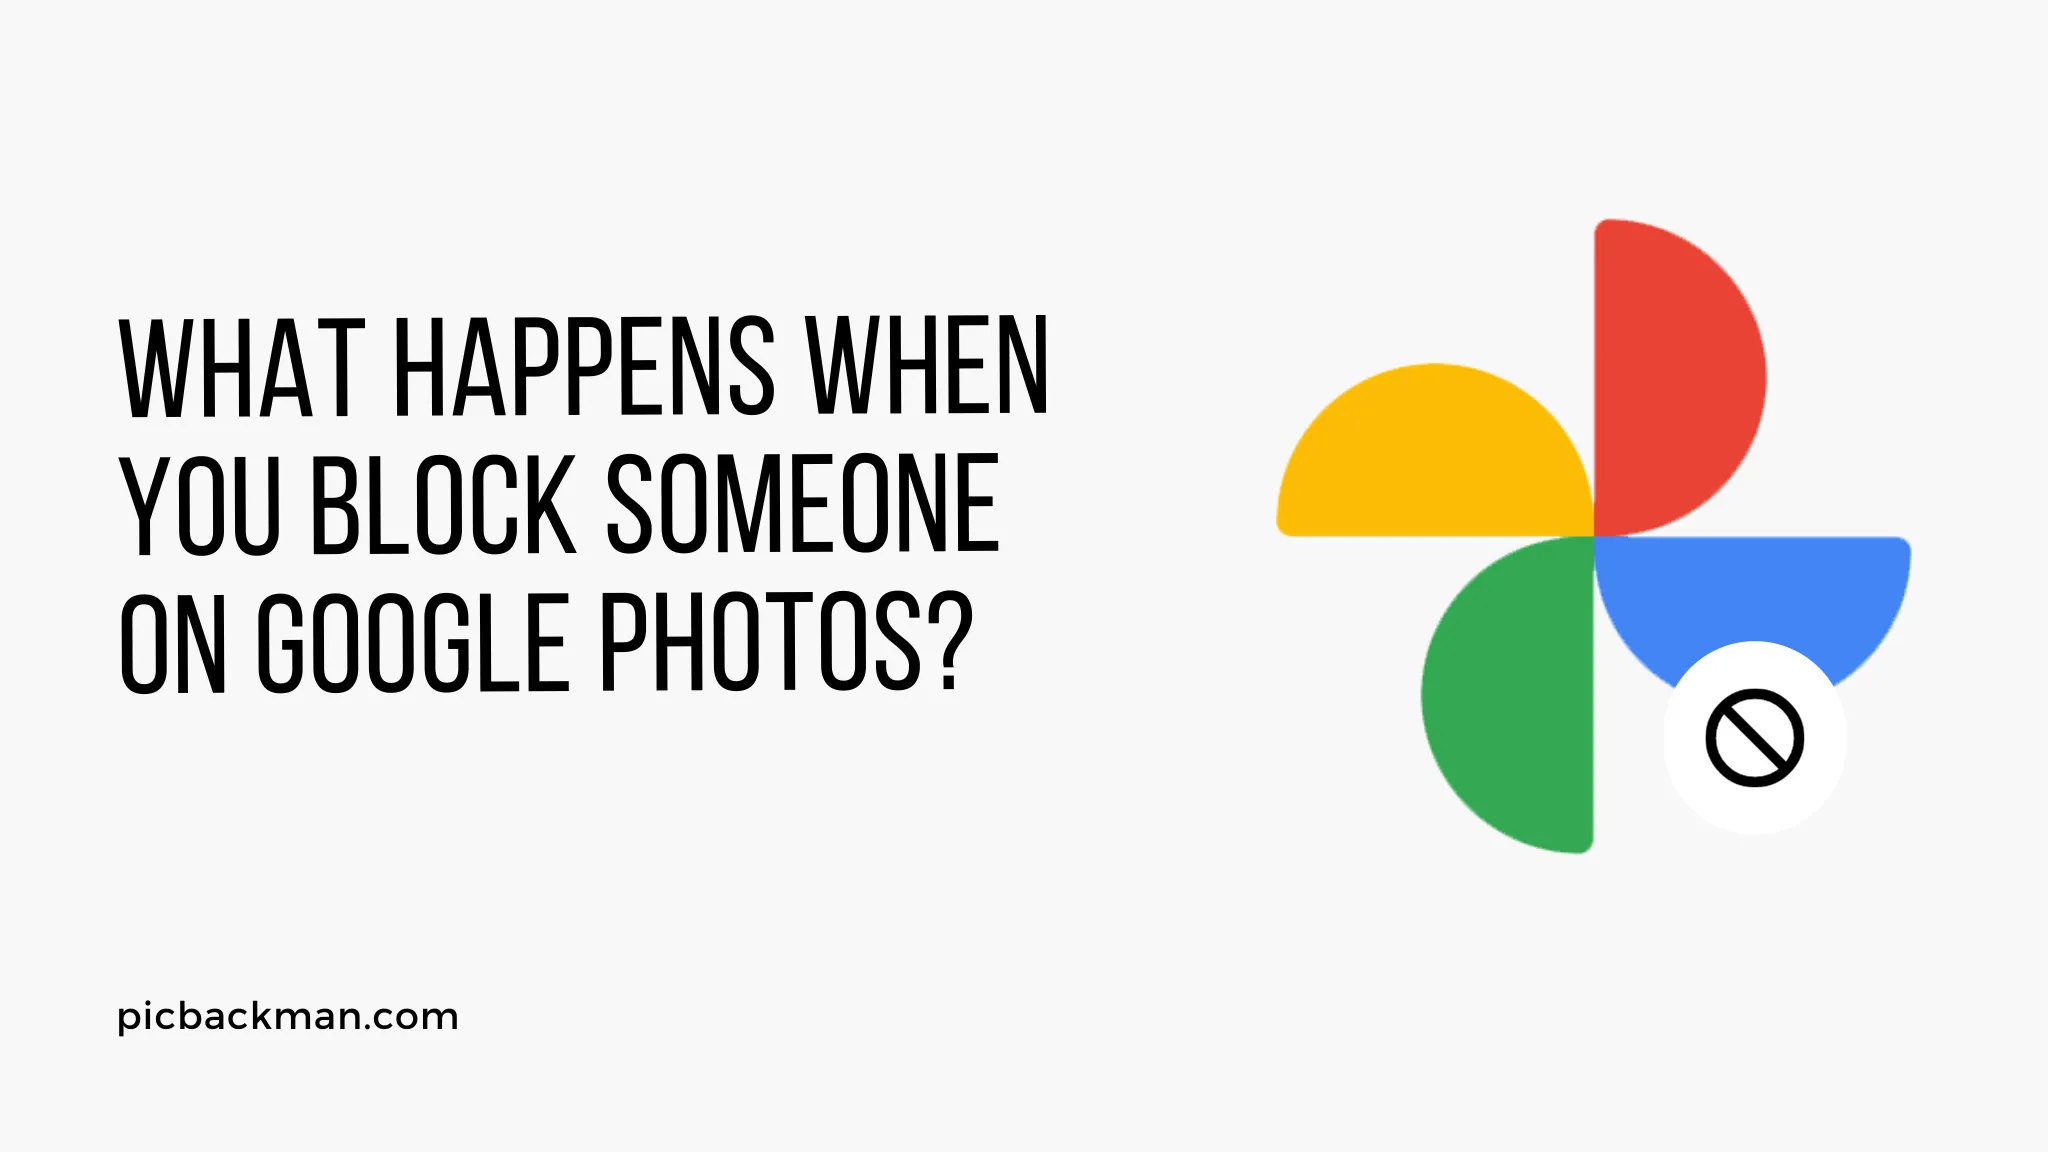 What happens when you block someone on Google Photos?